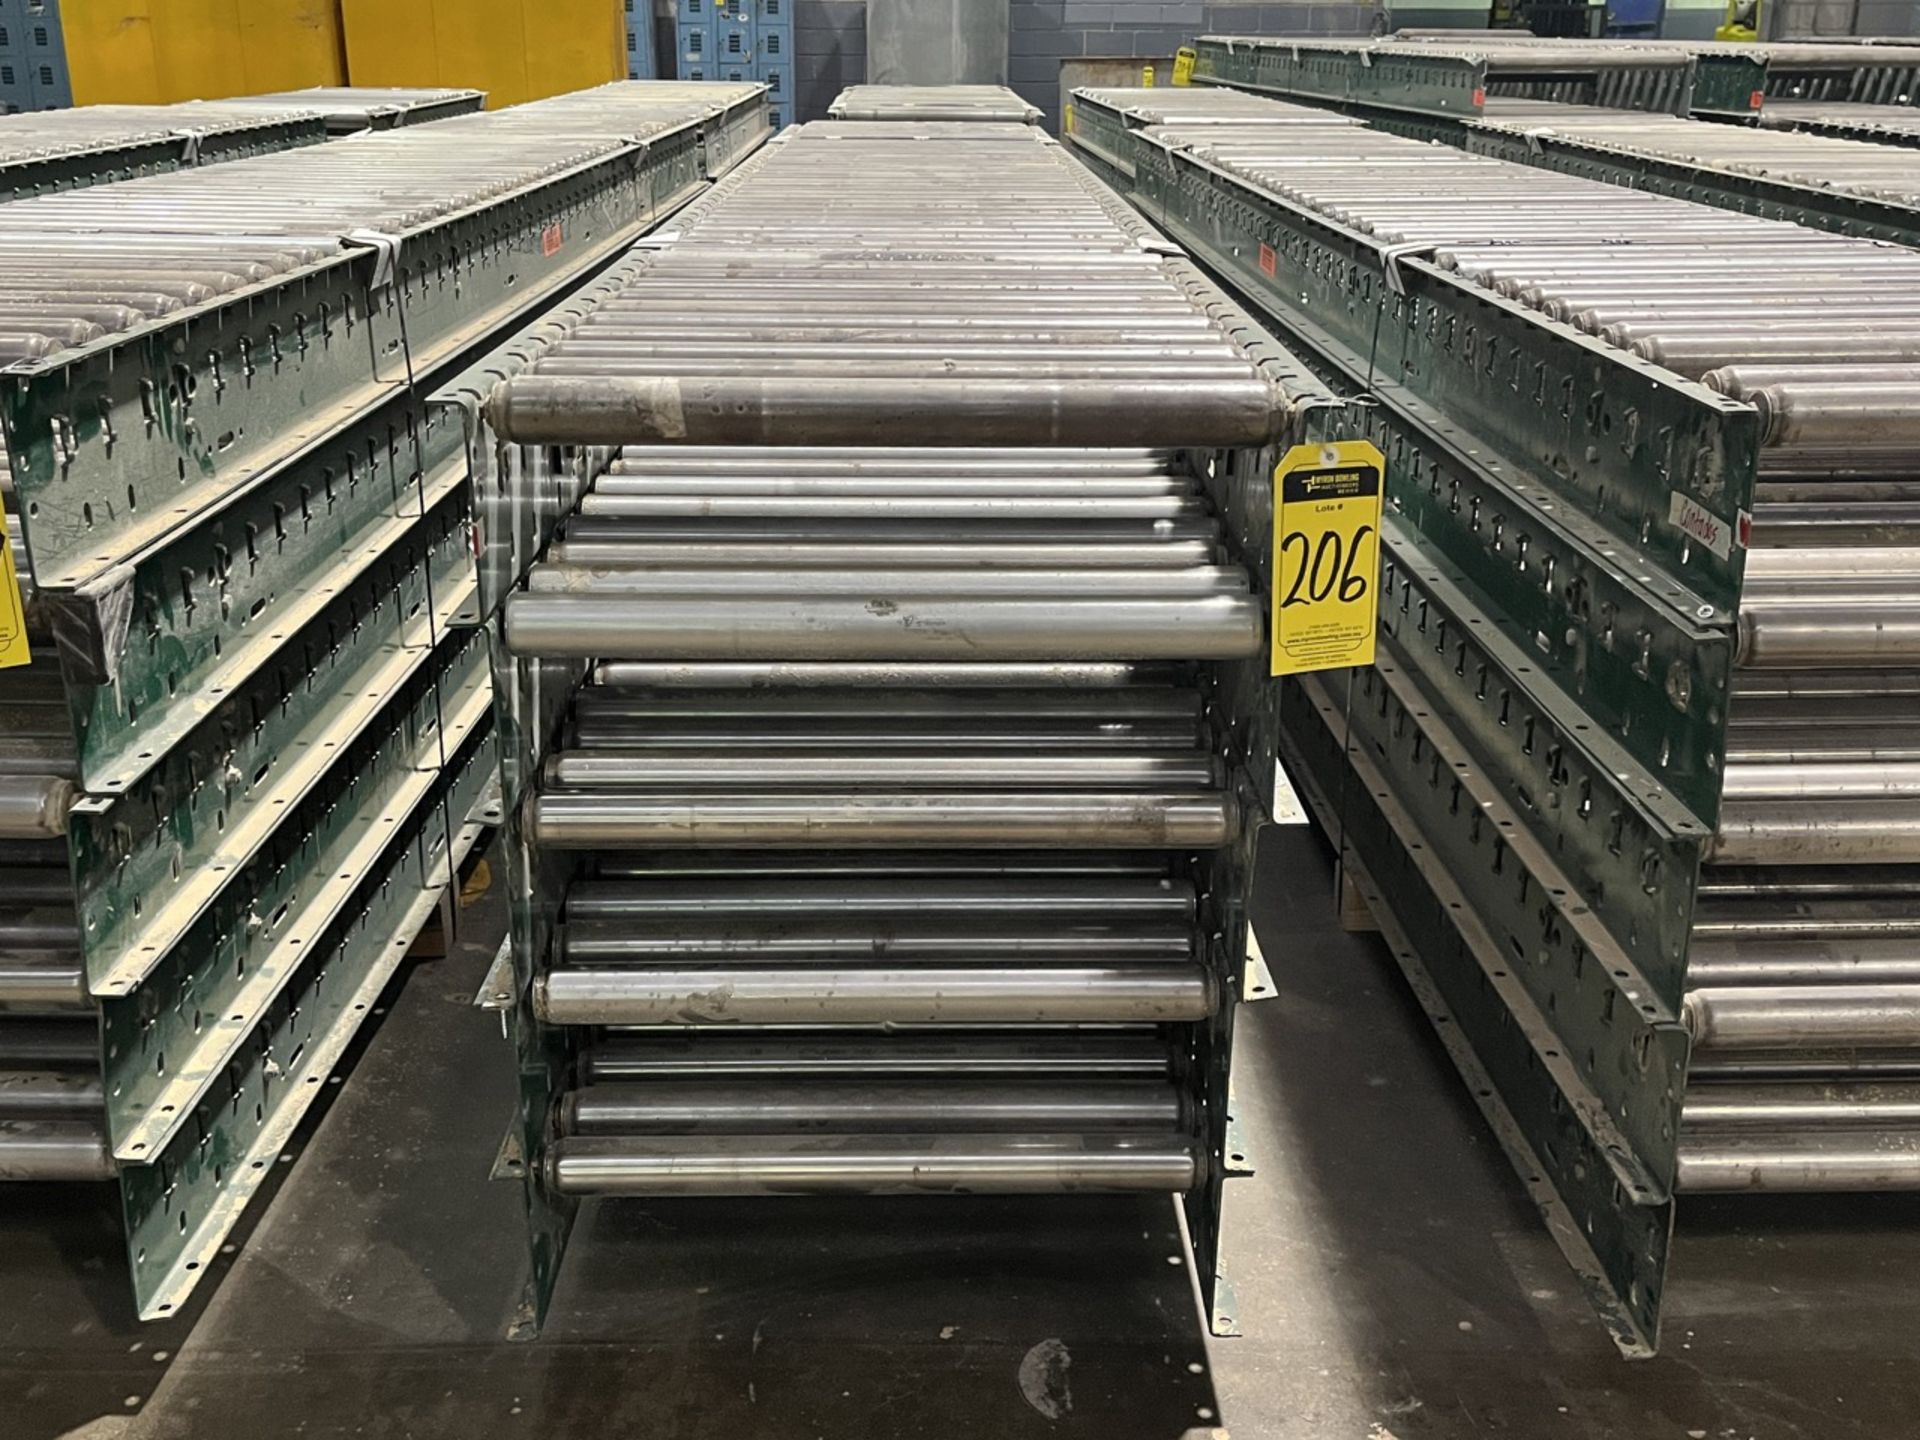 5 pieces of roller conveyor belt each measuring approx. 62 cm wide x 3.65 m long; 5 pieces of rolle